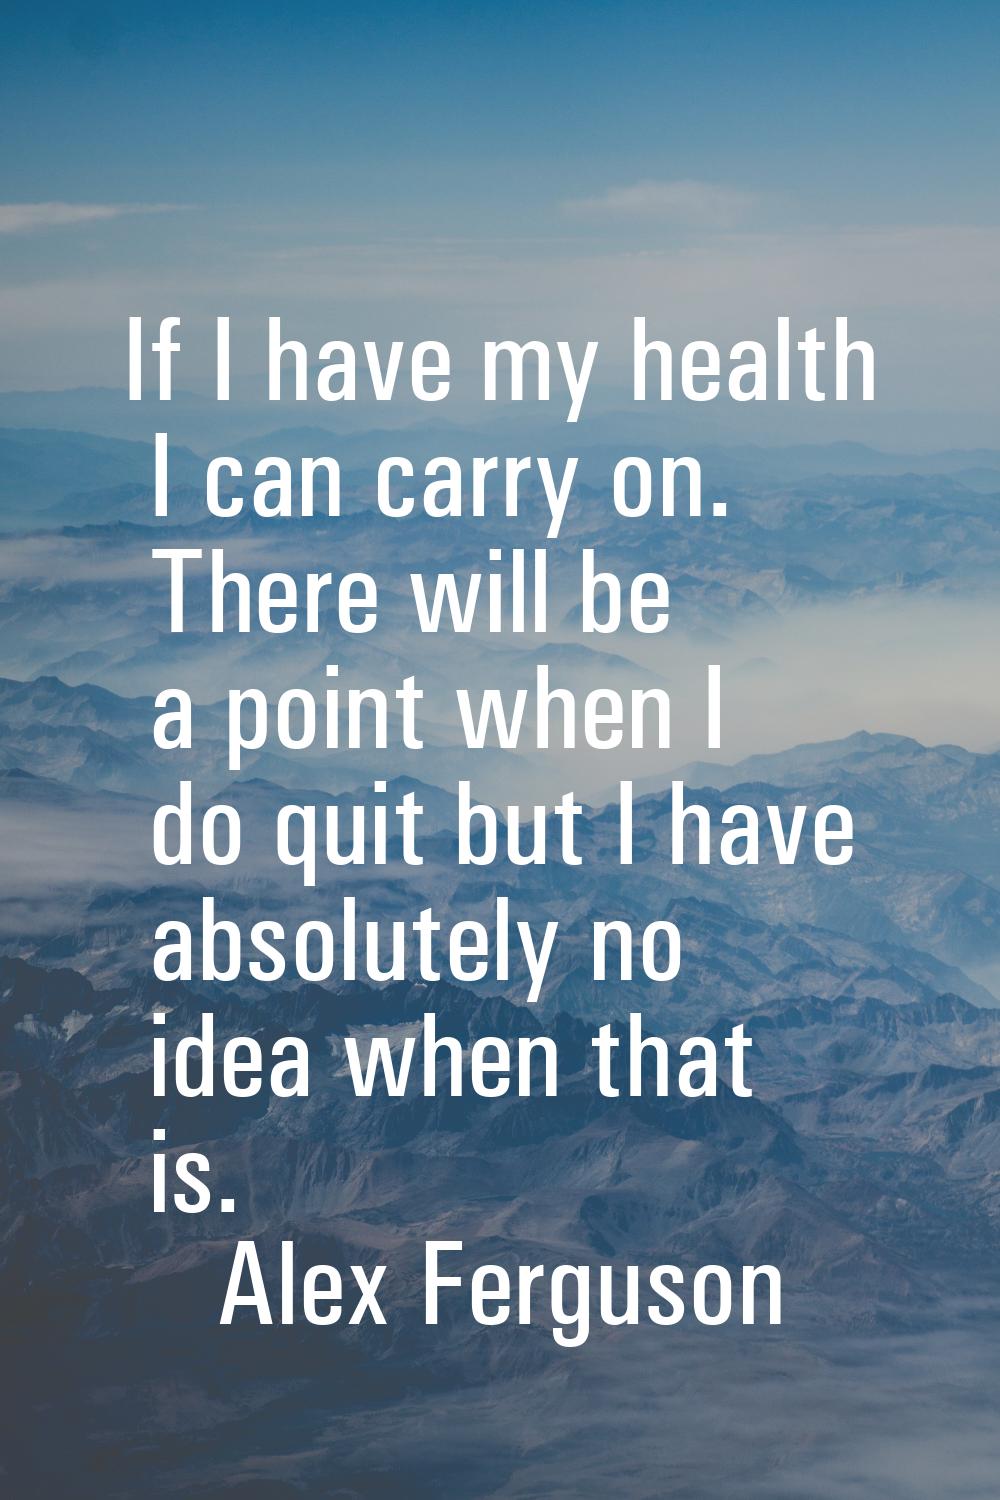 If I have my health I can carry on. There will be a point when I do quit but I have absolutely no i